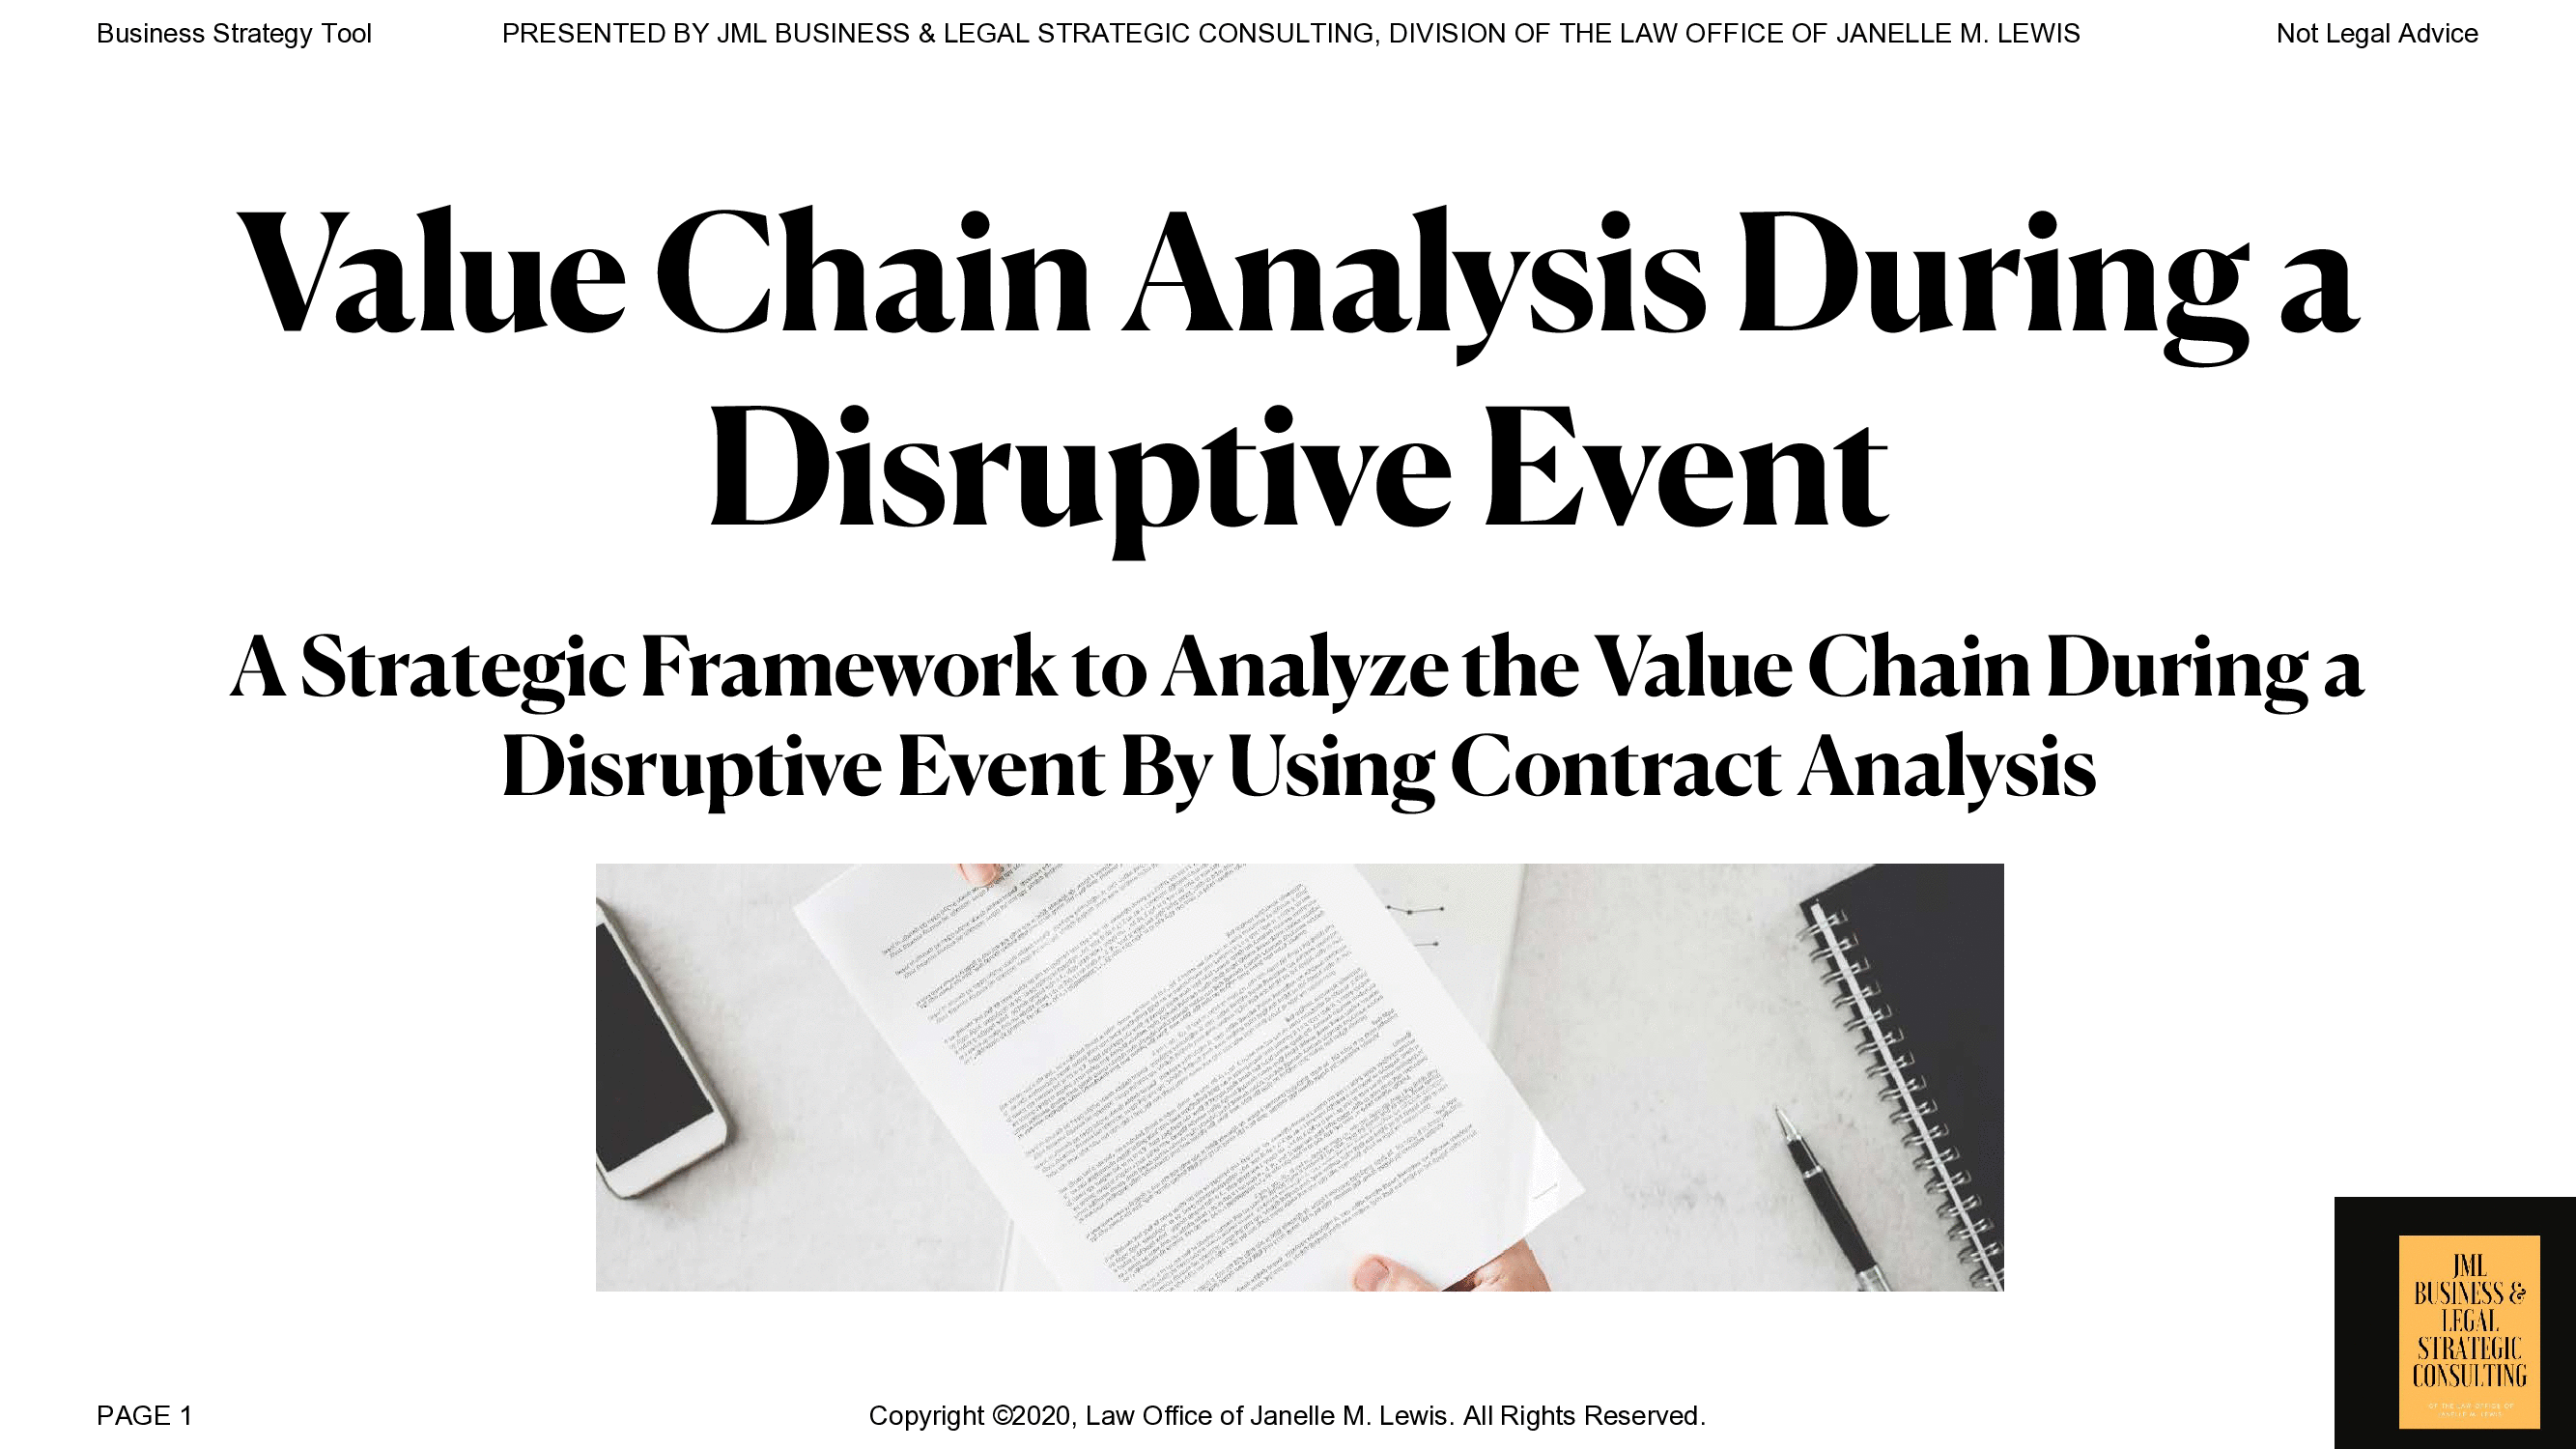 Value Chain Analysis During a Disruptive Event